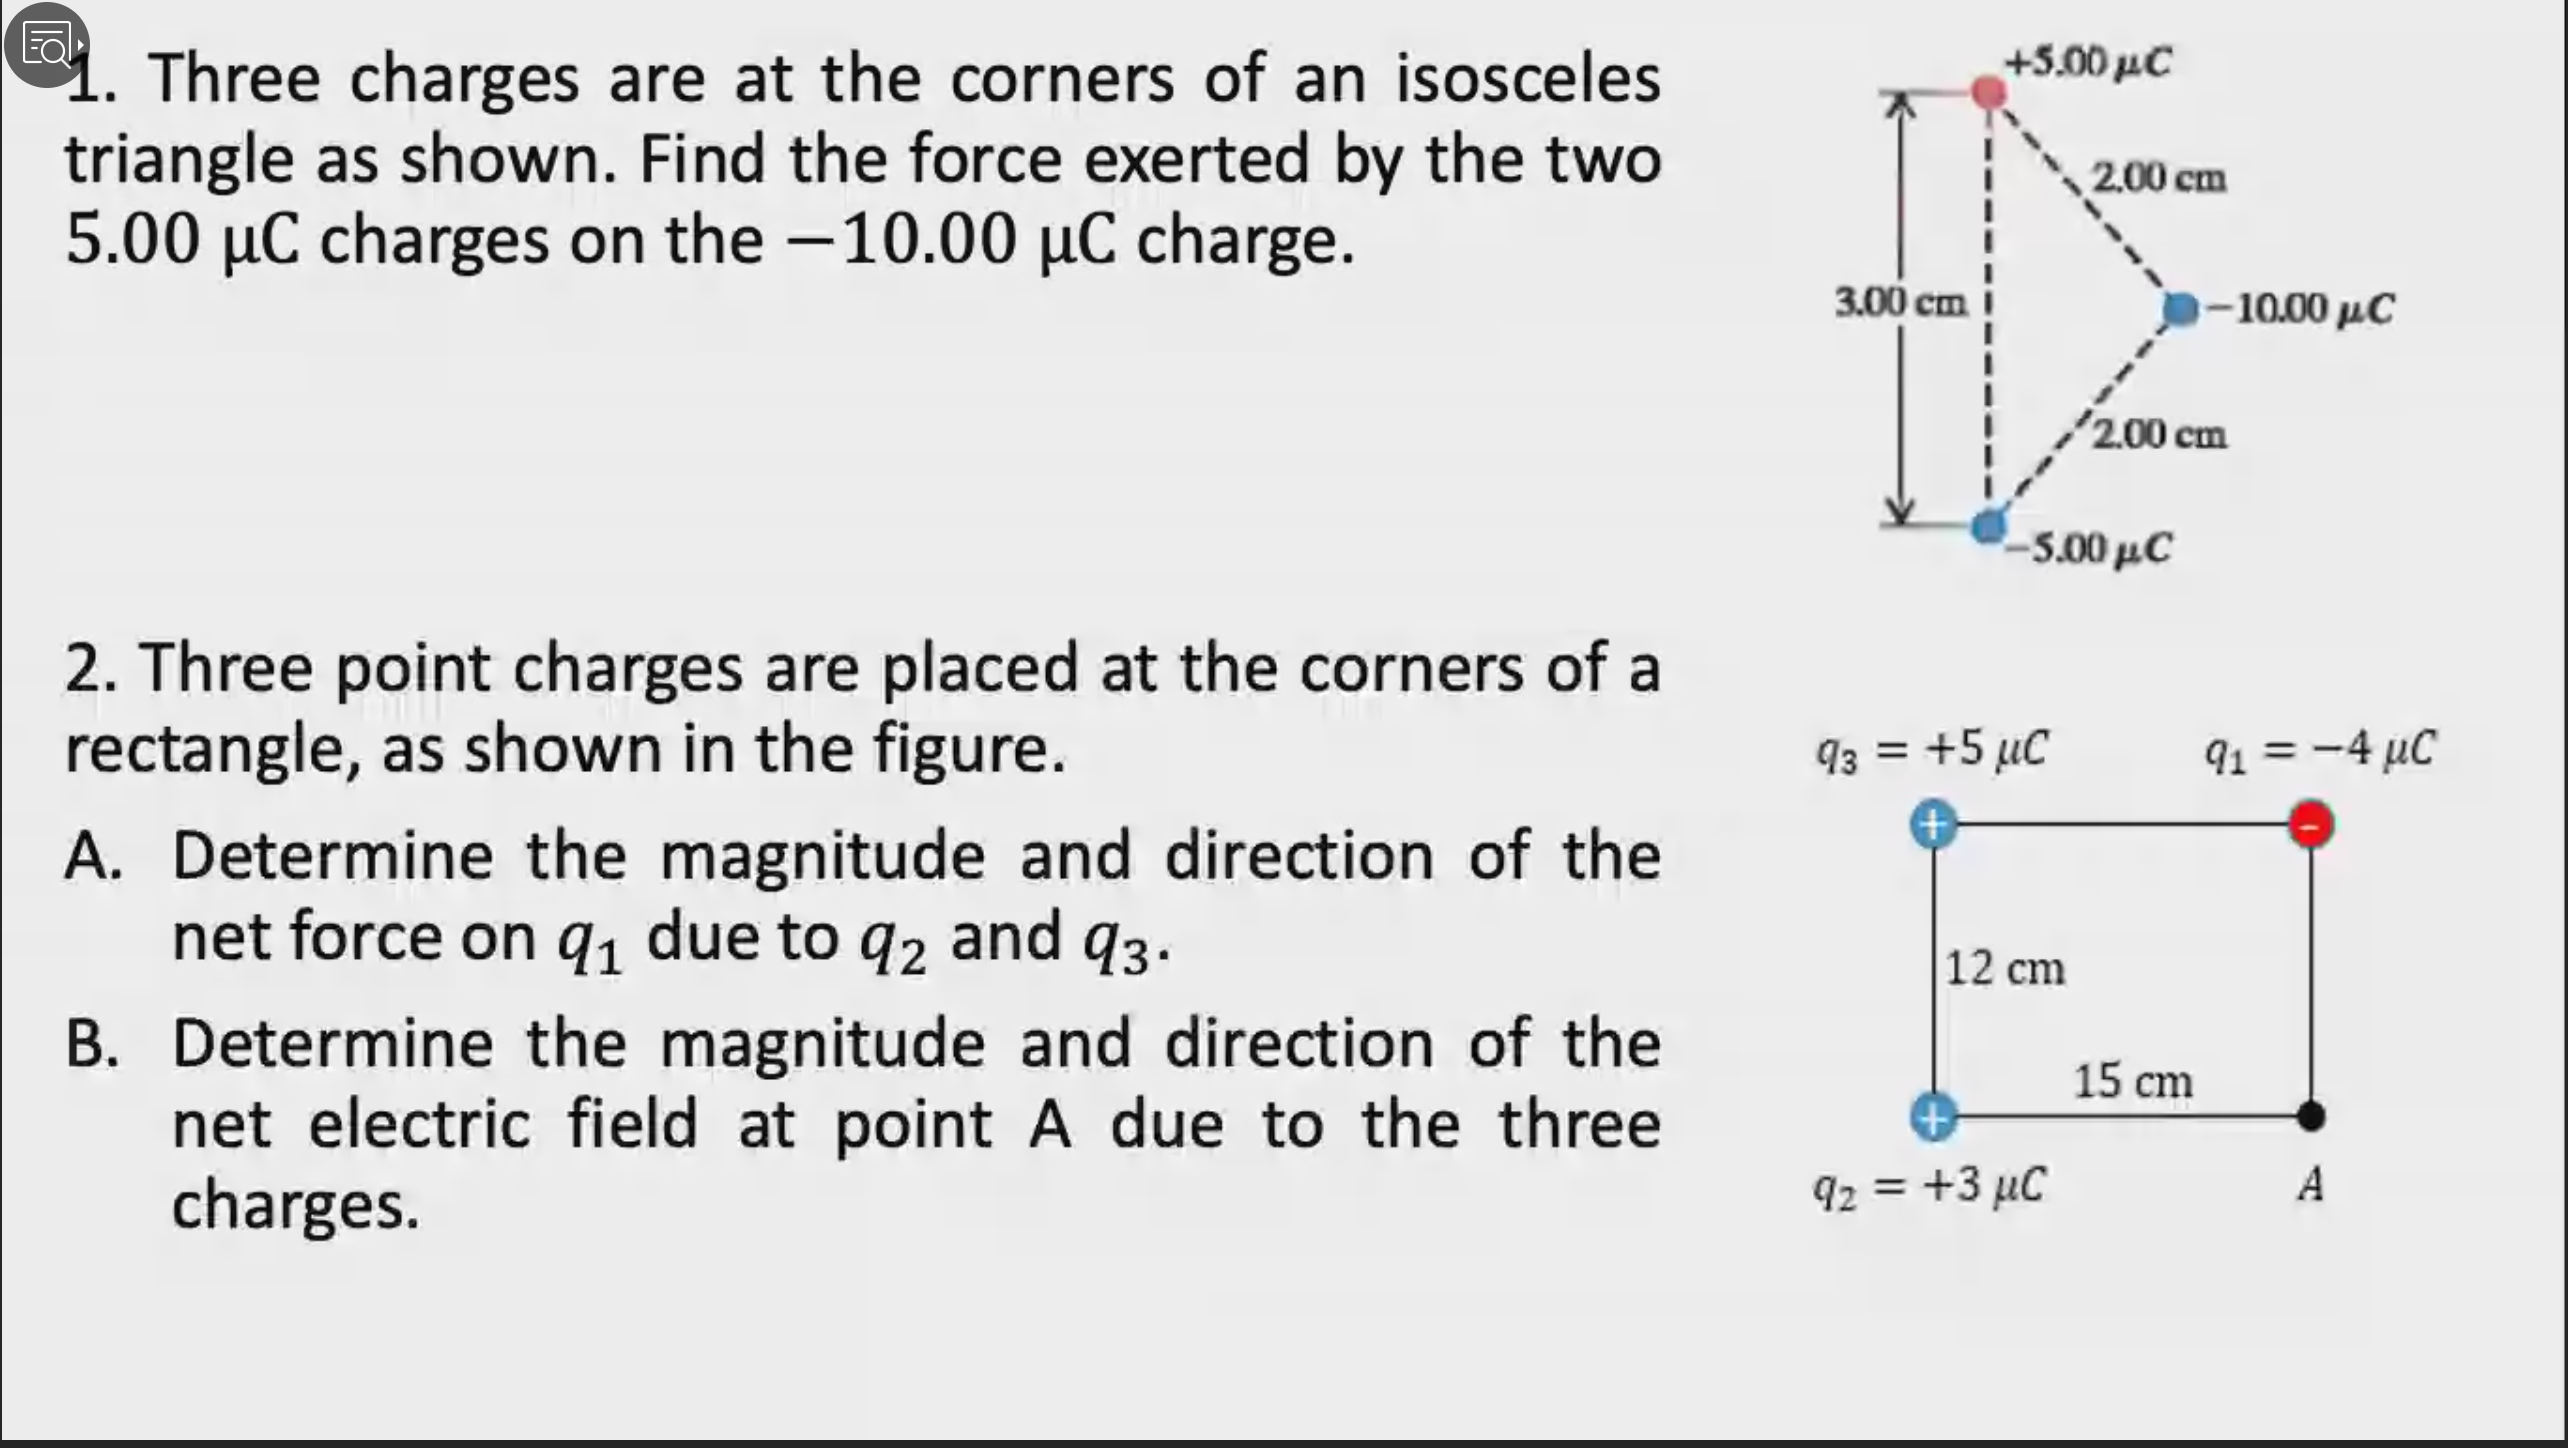 +5.00 uC
1. Three charges are at the corners of an isosceles
triangle as shown. Find the force exerted by the two
5.00 µC charges on the -10.00 µC charge.
2.00 cm
|
3.00 cm
-10.00 μC
2.00 cm
5.00 μC
